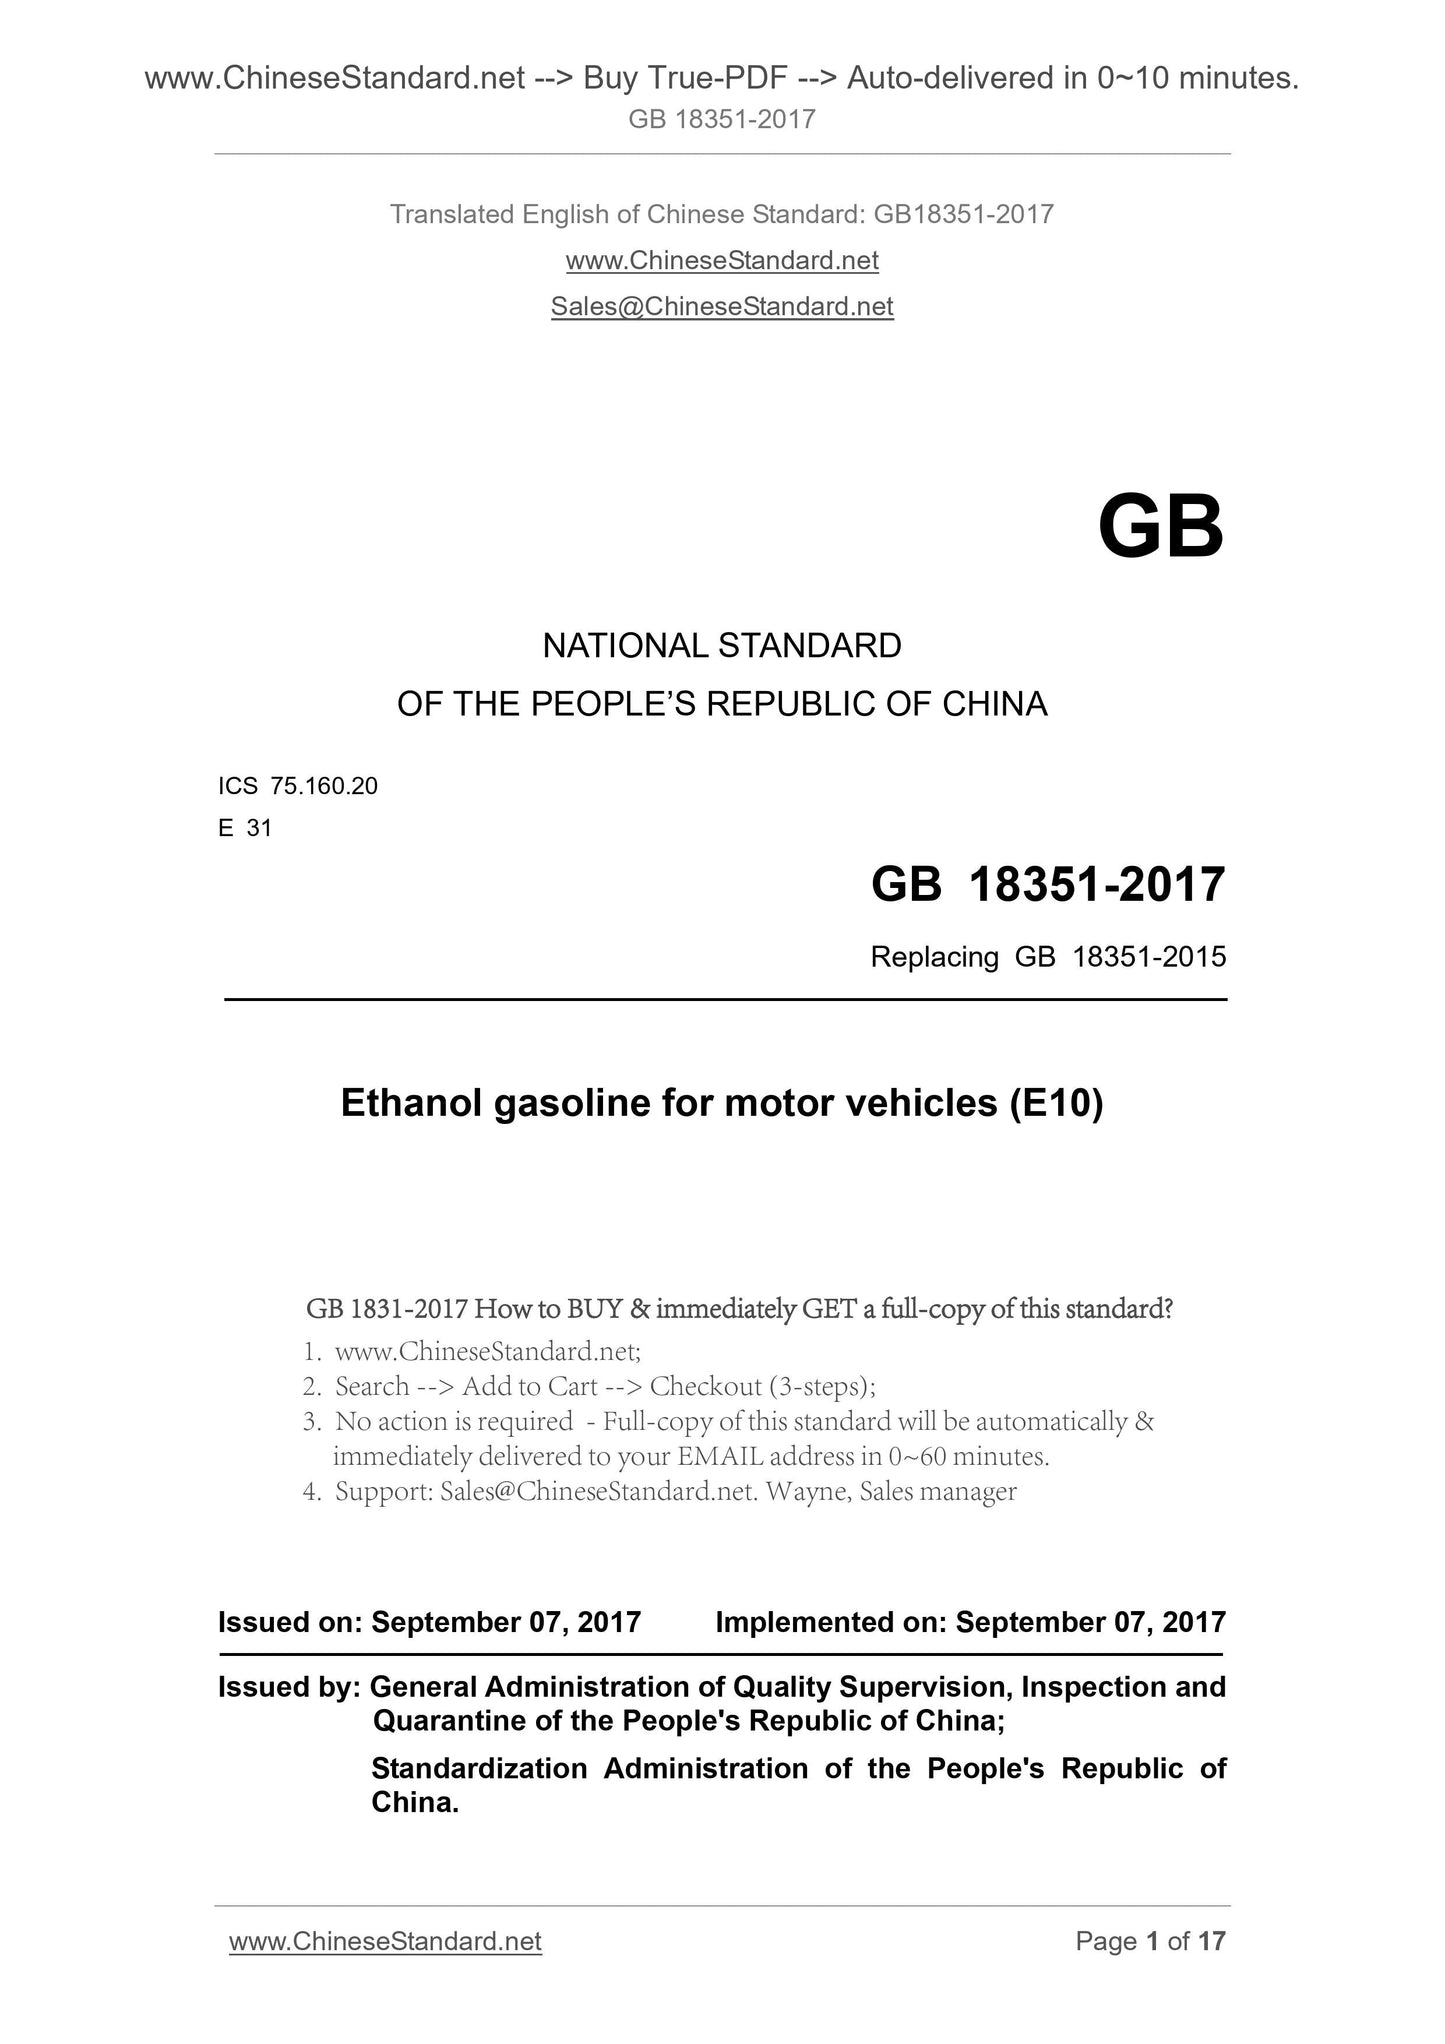 GB 18351-2017 Page 1